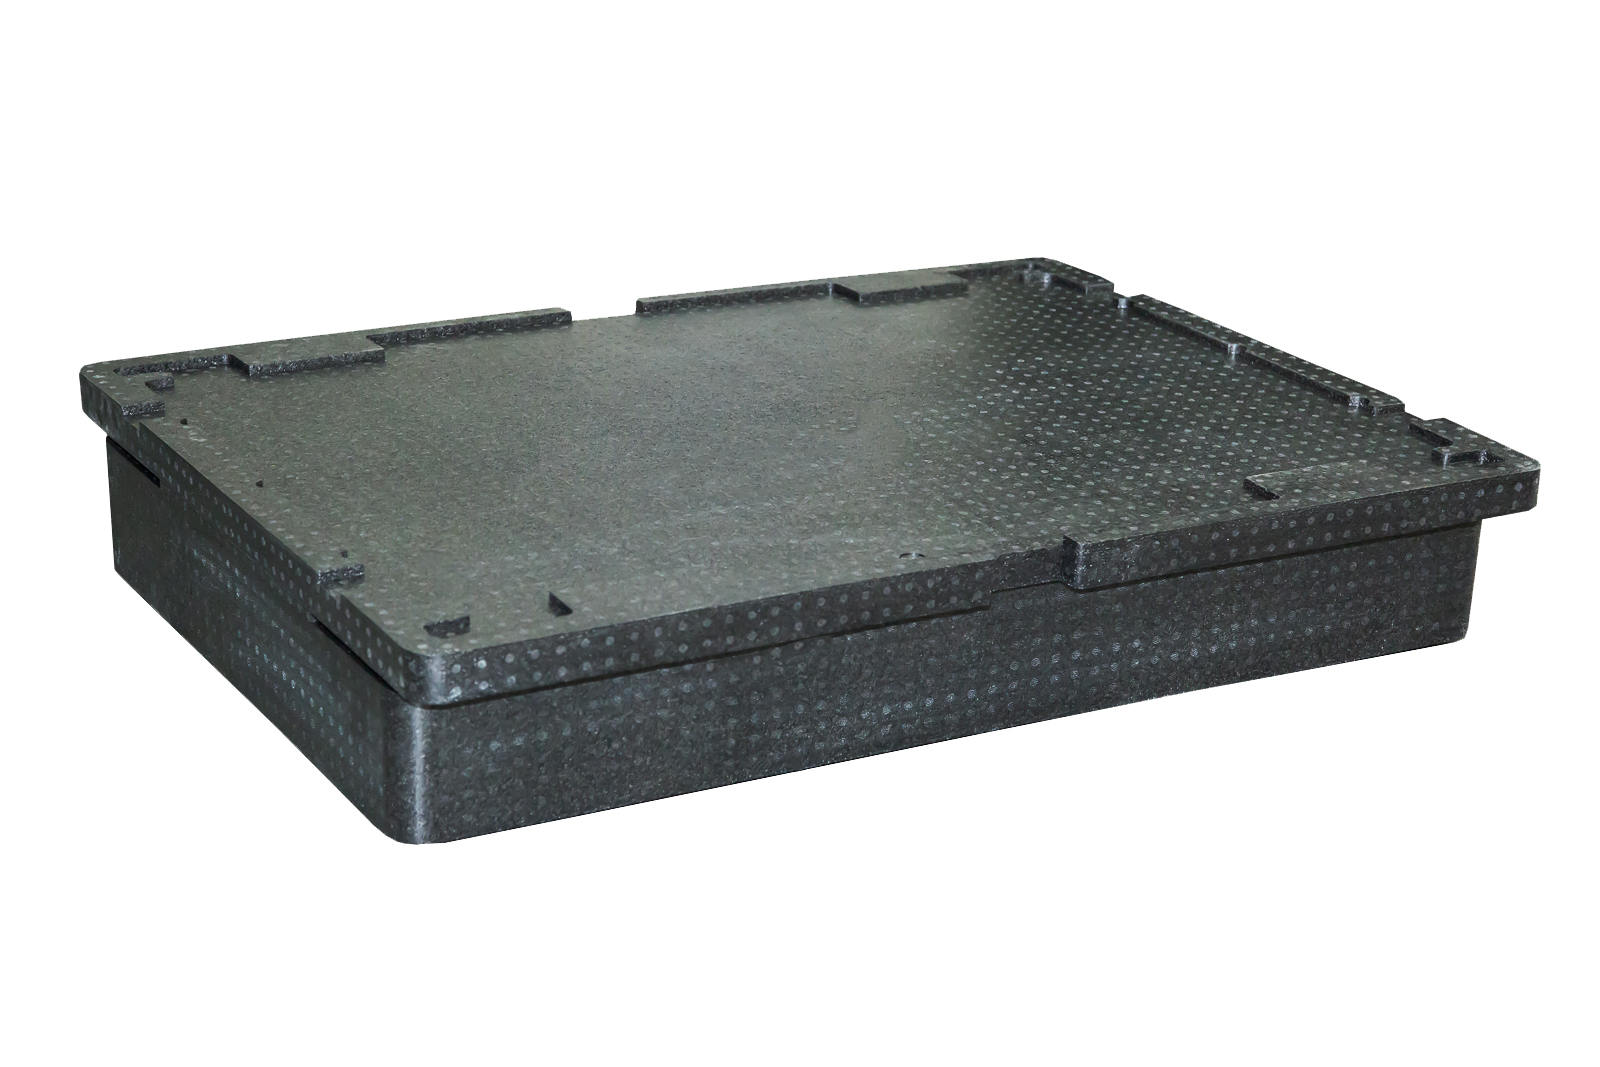 EV 2020 EPP battery dunnage tray.